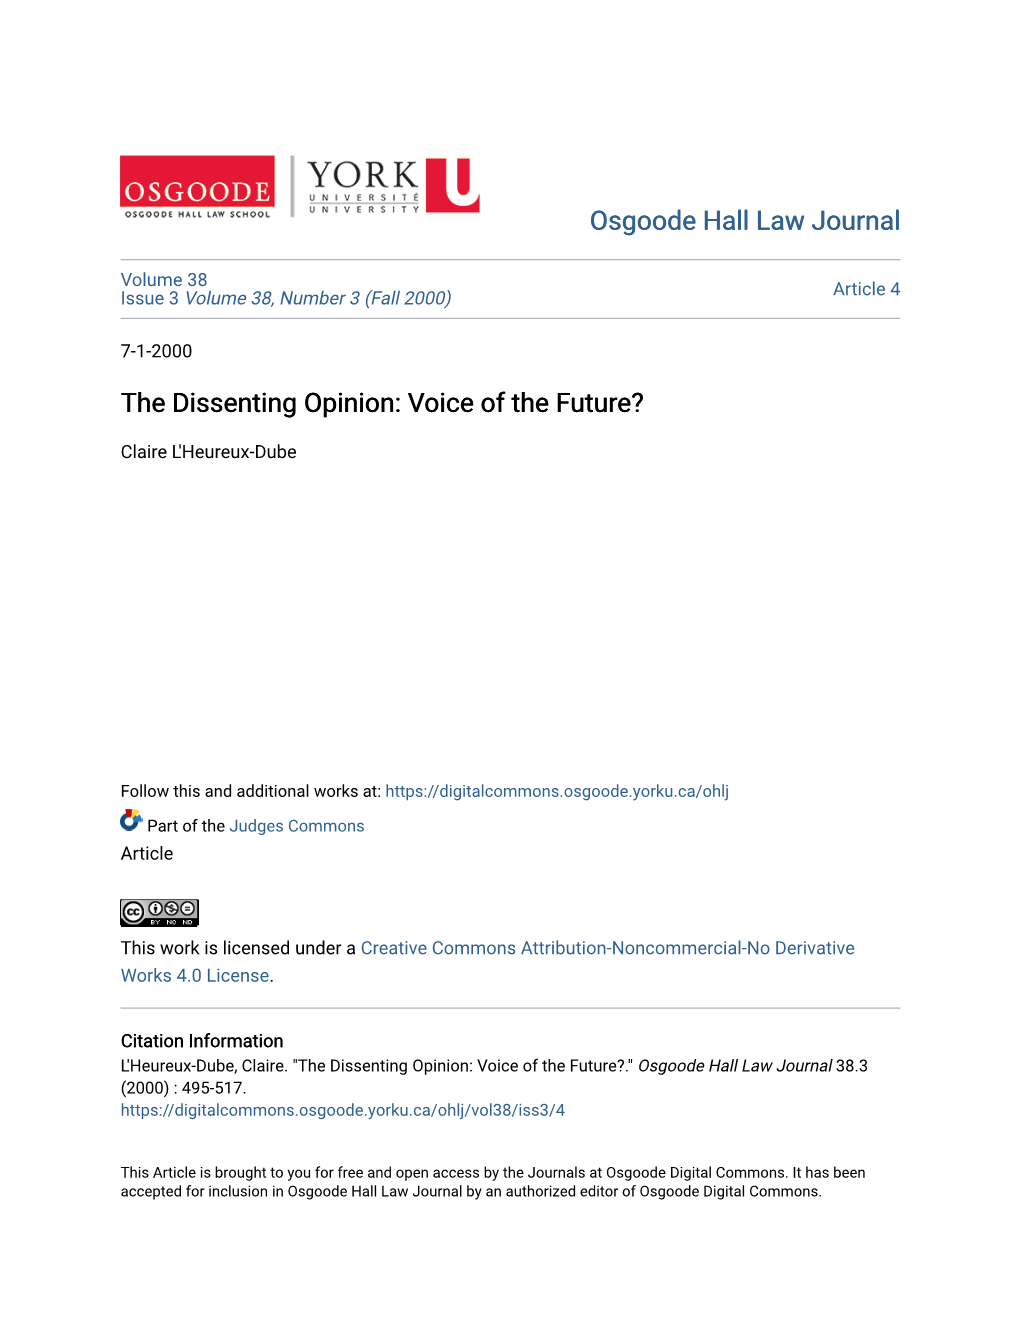 The Dissenting Opinion: Voice of the Future?